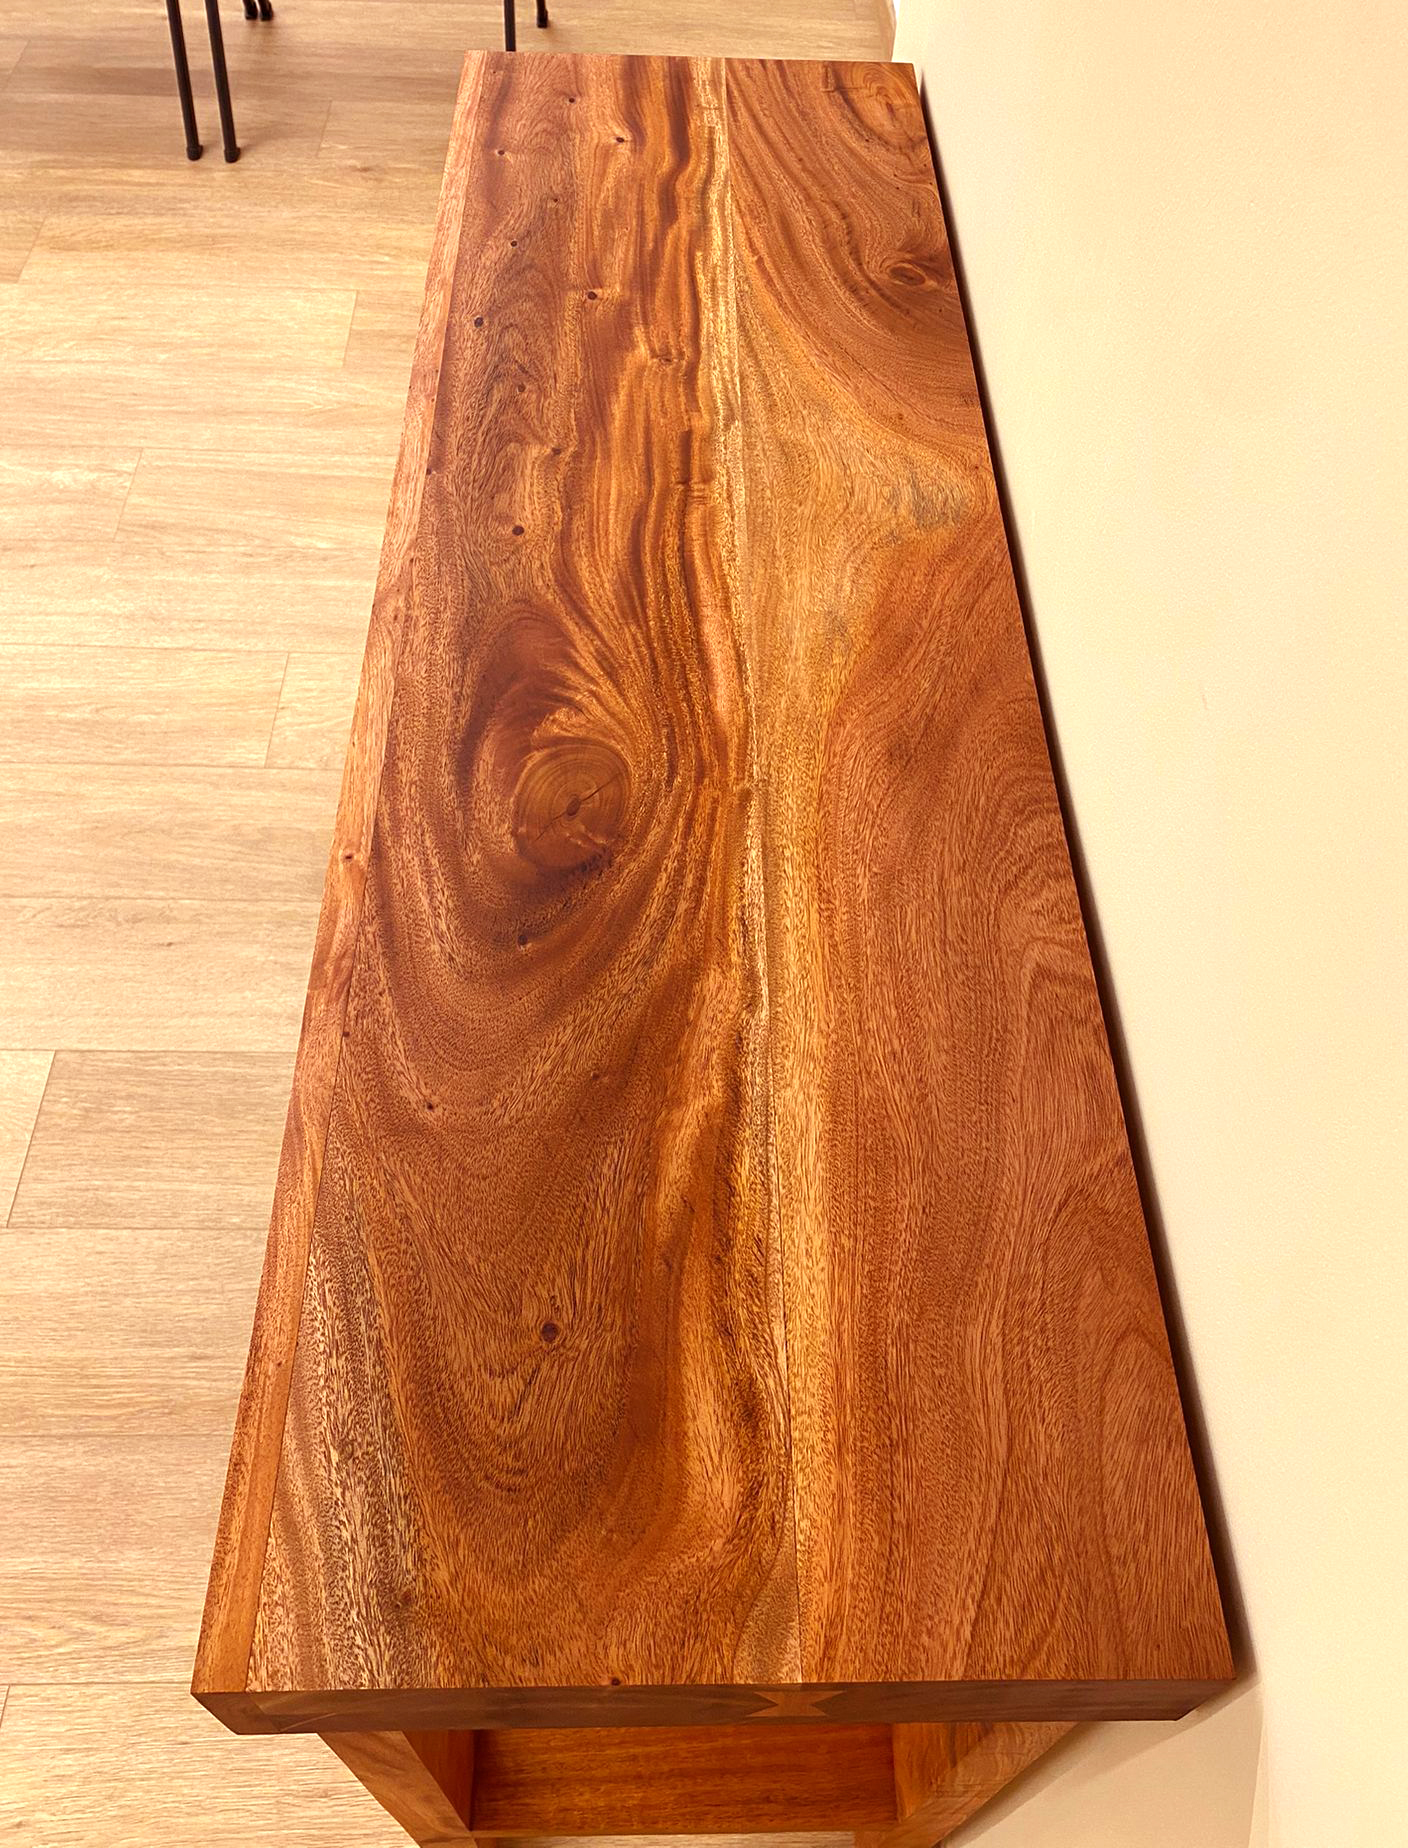 A table made of African mahogany